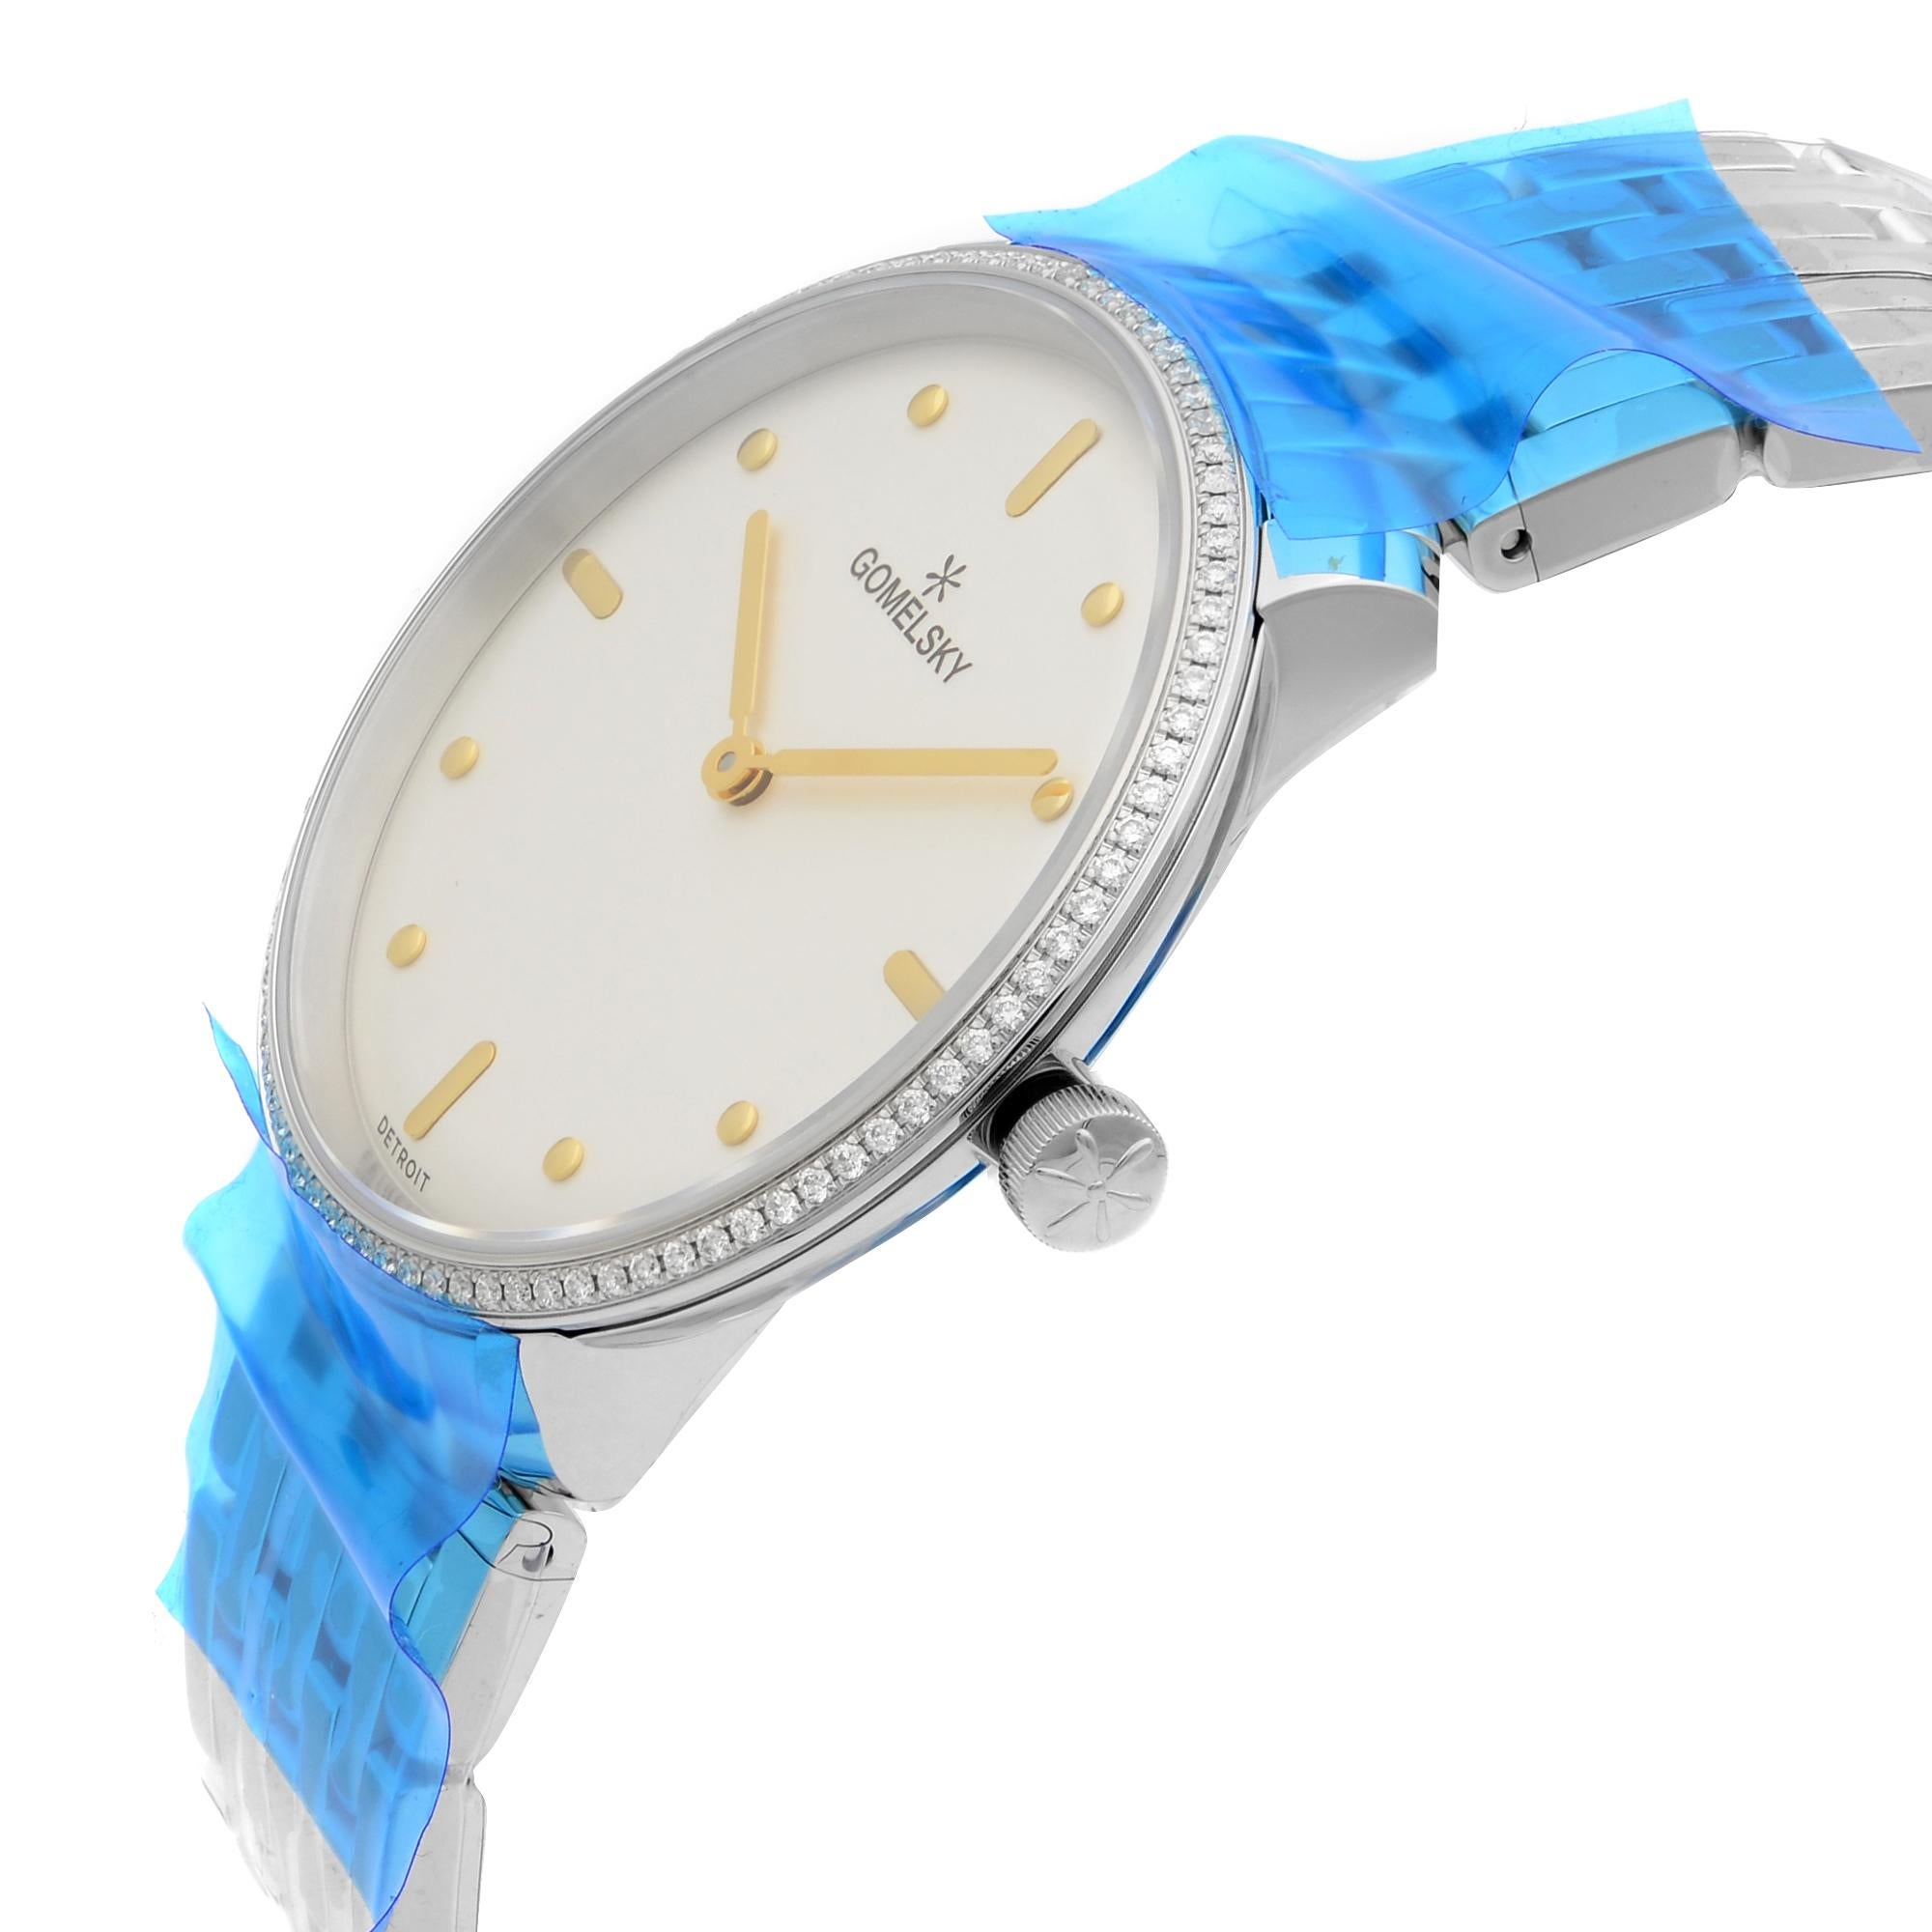 This brand new Gomelsky Audry G0120112281 is a beautiful Ladie's timepiece that is powered by quartz (battery) movement which is cased in a stainless steel case. It has a round shape face, no features dial and has hand sticks & dots style markers.